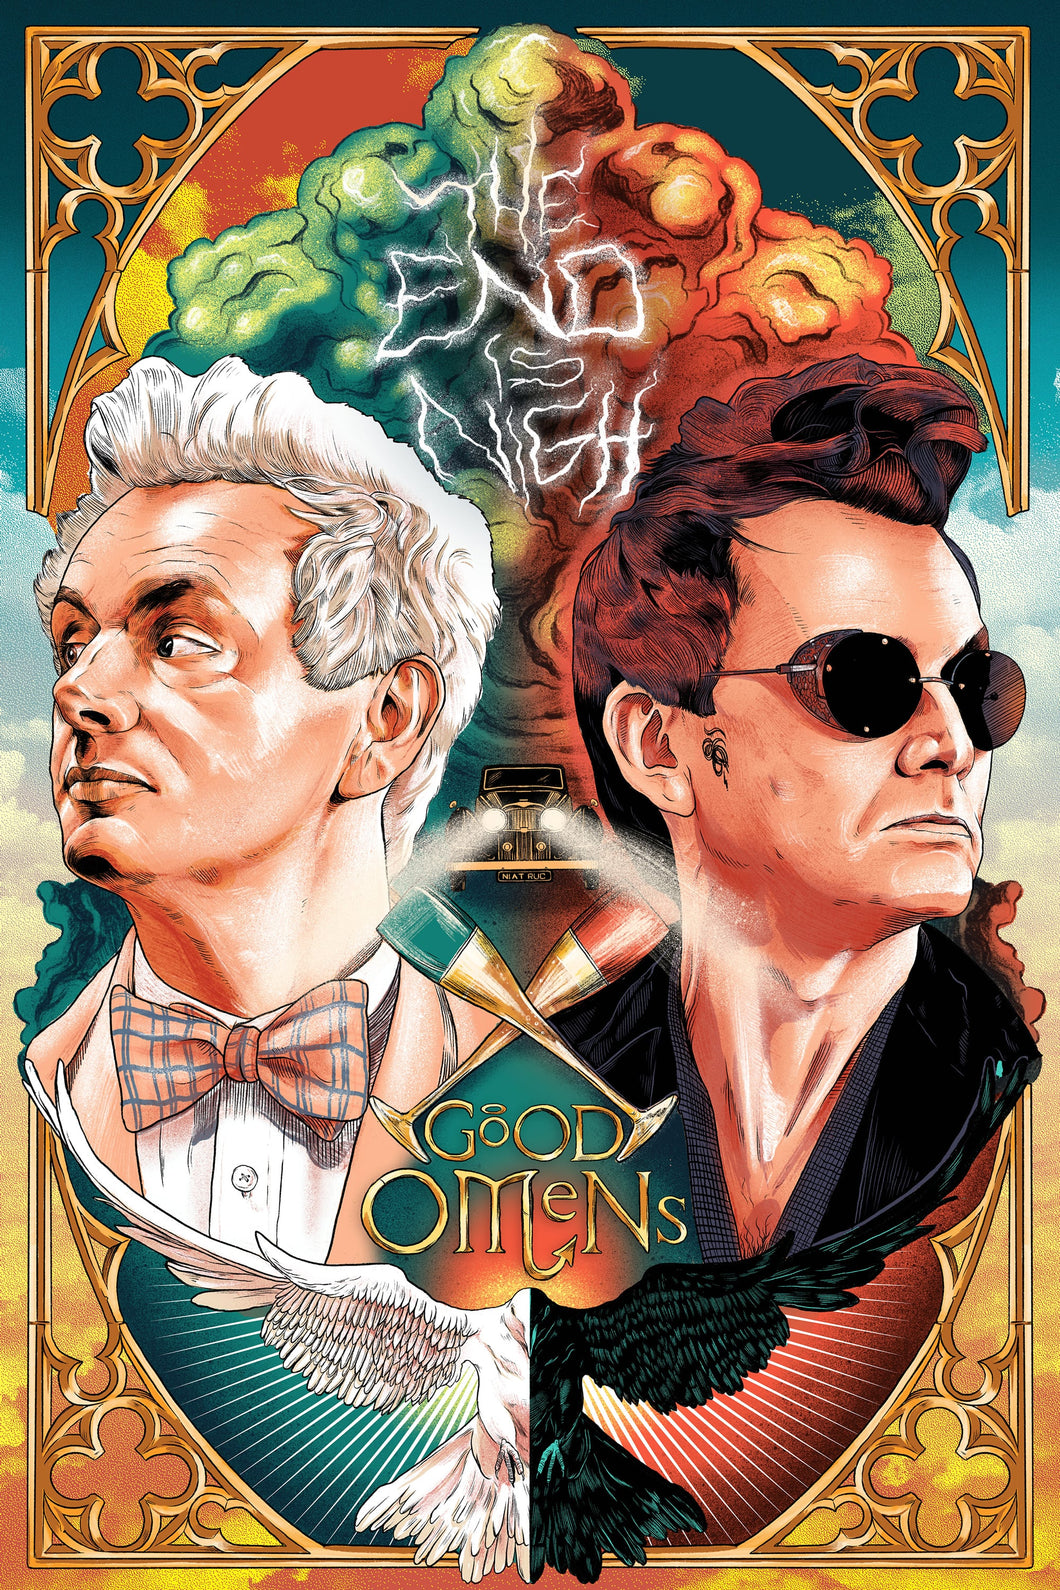 Good Omens (2019)v3 TV Series High Quality Glossy Paper A1 A2 A3 A4 A3 Framed or Unframed!!!